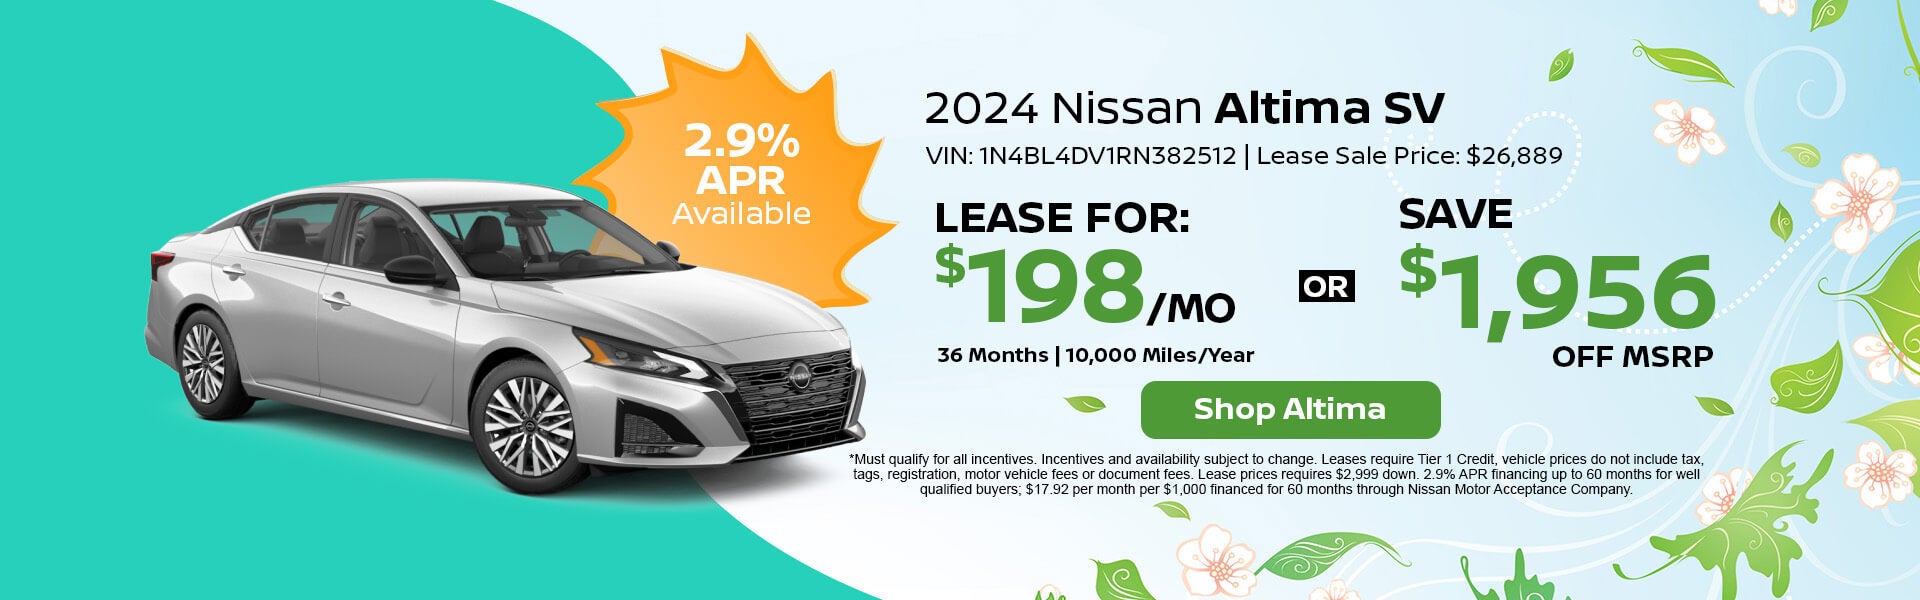 Nissan Altima Special Offer Norwell, MA